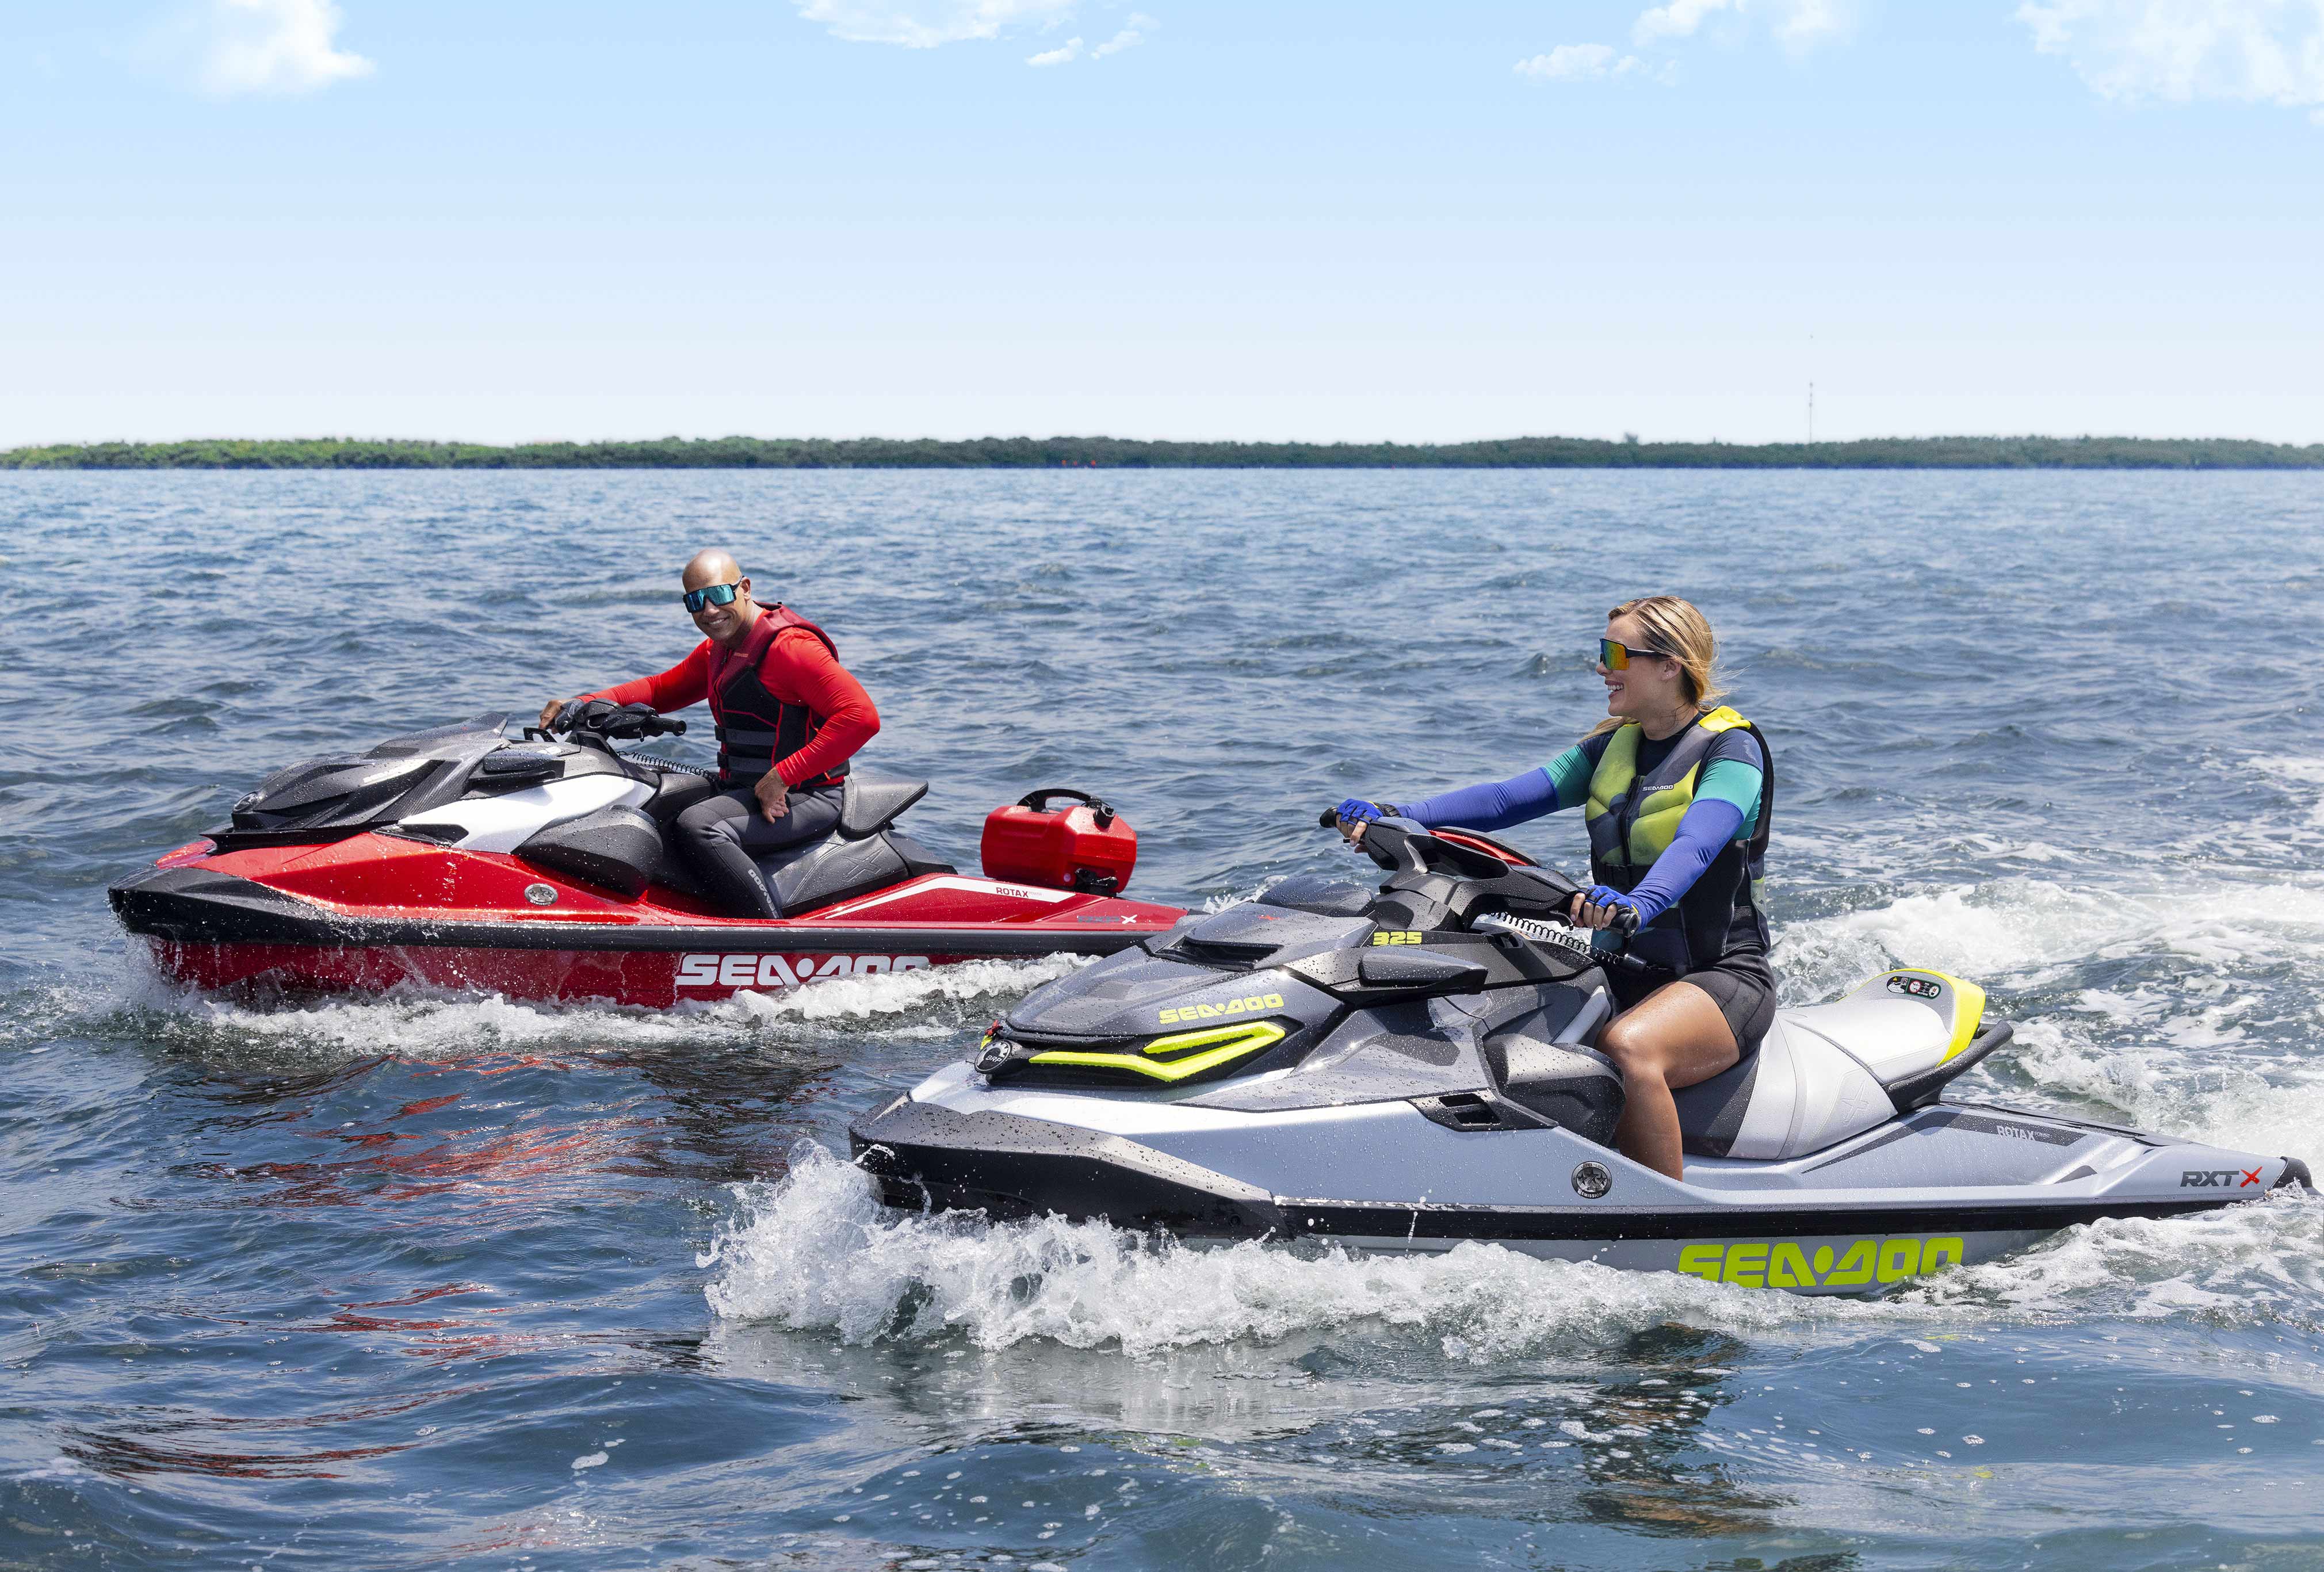 Man sitting on a Sea-Doo RXP-X 325 and a woman sitting on a Sea-Doo RXT-X